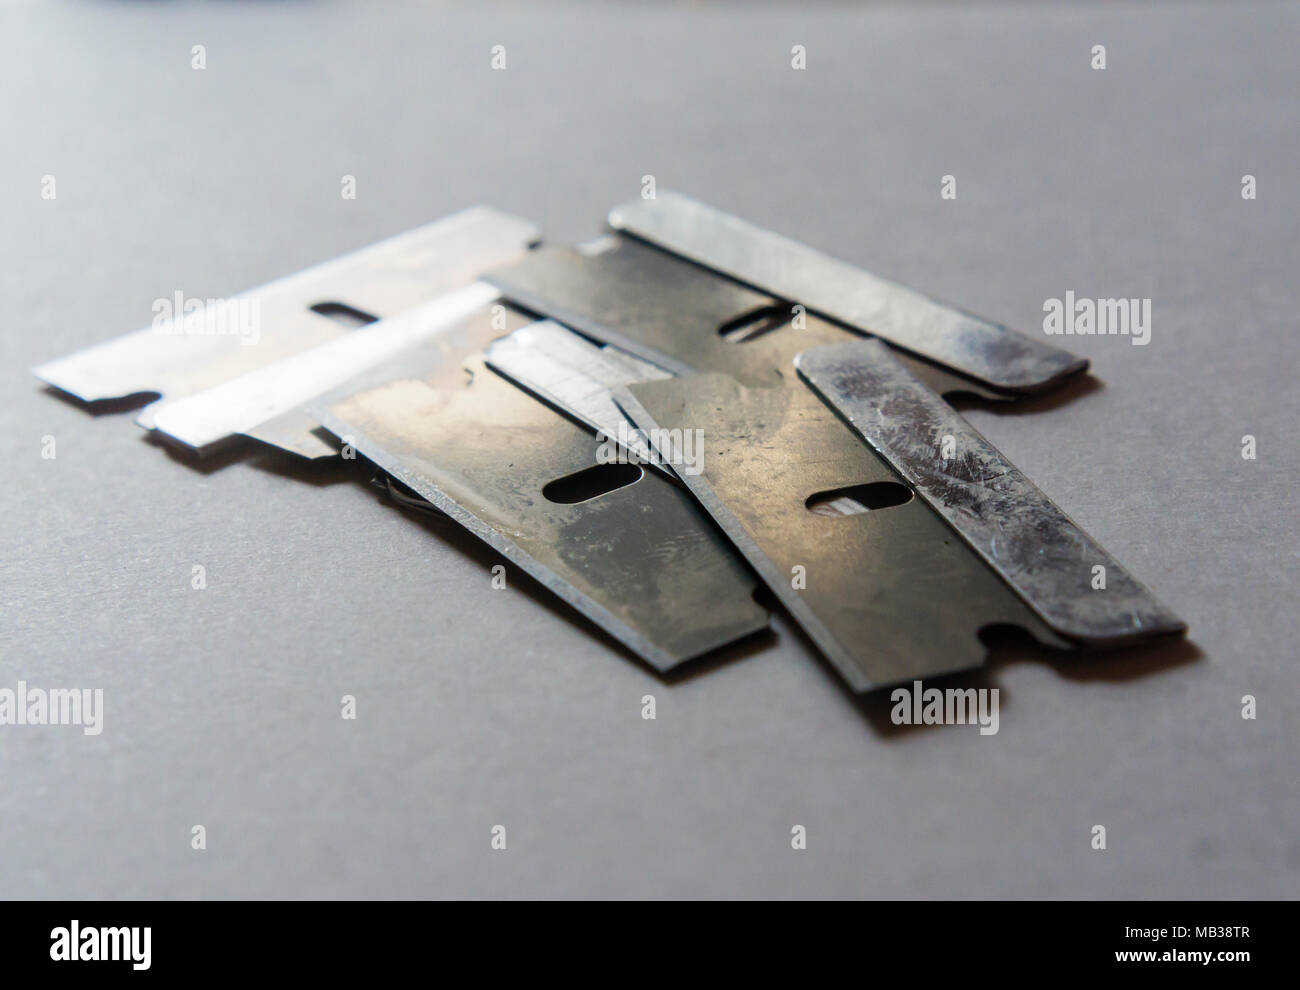 Chinese made stainless steel single-edged razor blades on Wednesday, April 4, 2018. Retailers in the U.S. are warning that tariffs imposed by the Trump administration on Chinese imports will raise prices. (Â© Richard B. Levine) Stock Photo